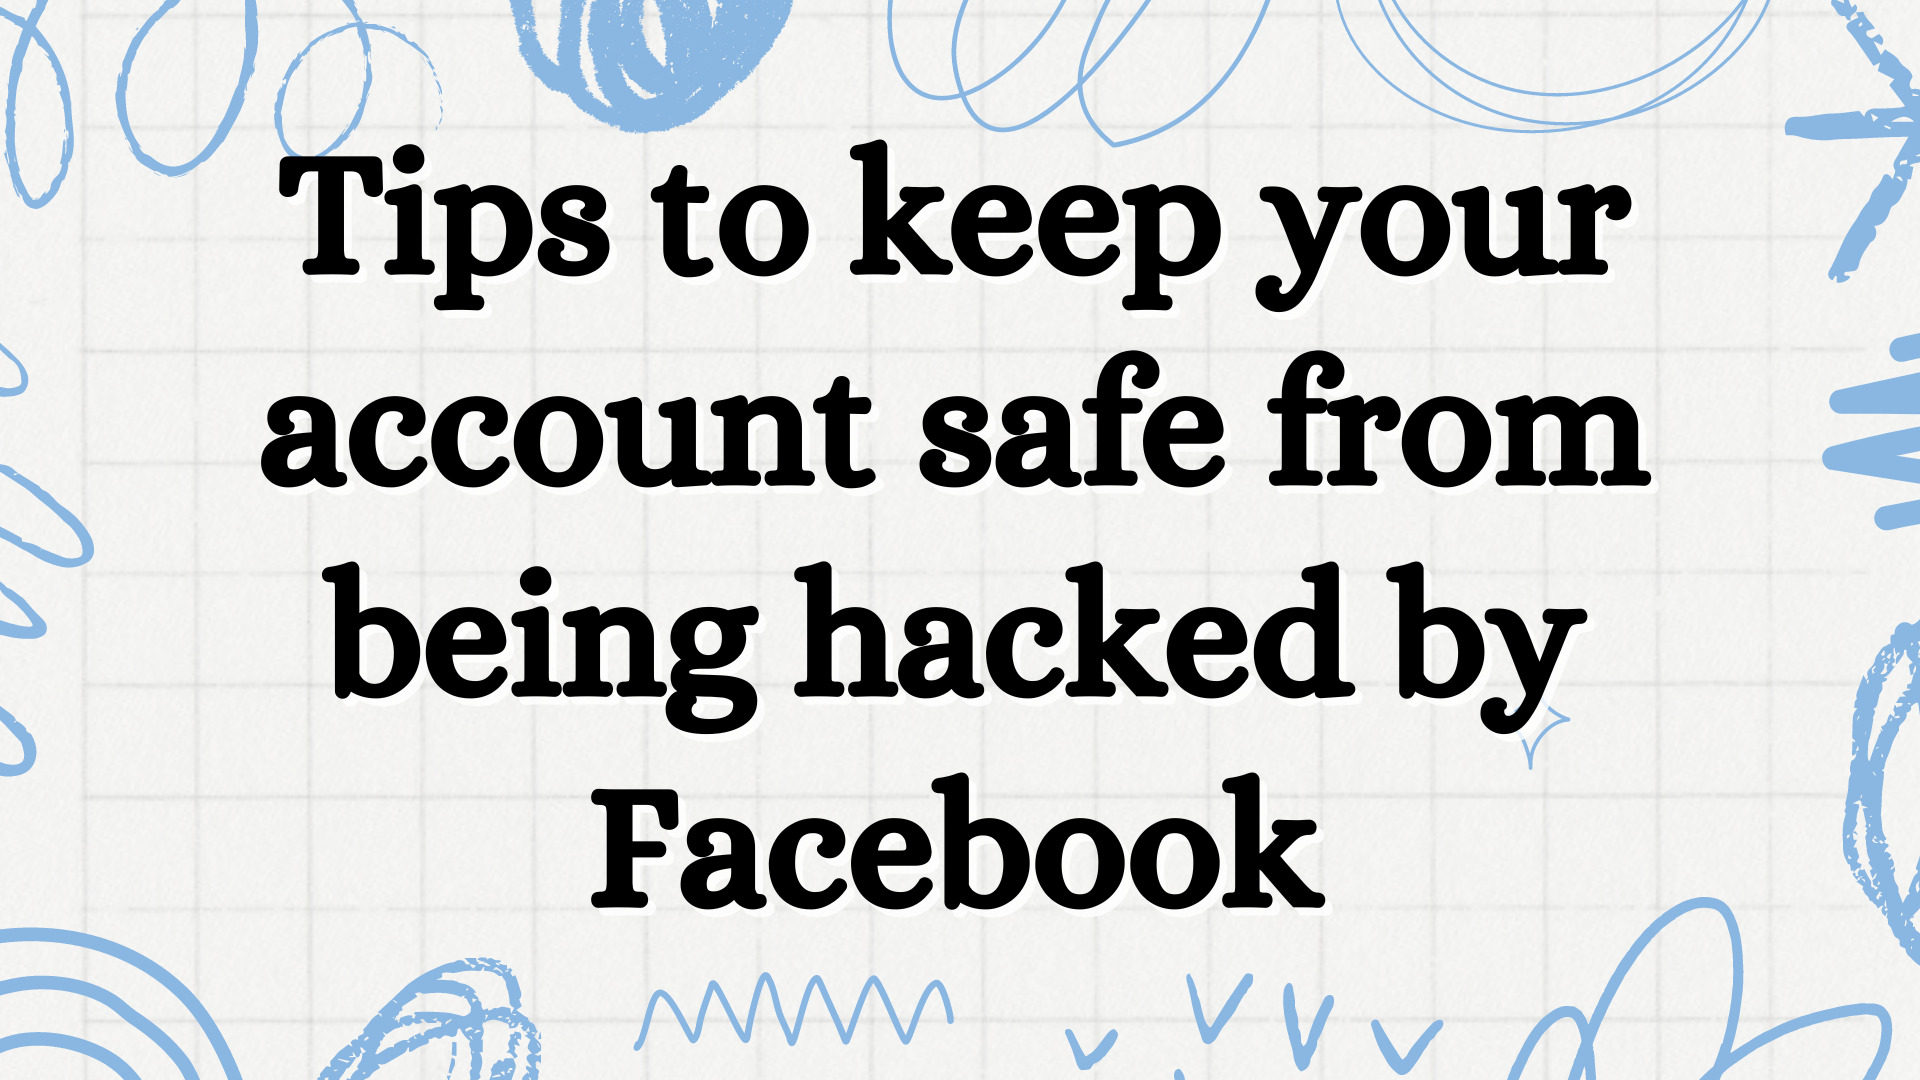 Tips to keep your account safe from being hacked by Facebook